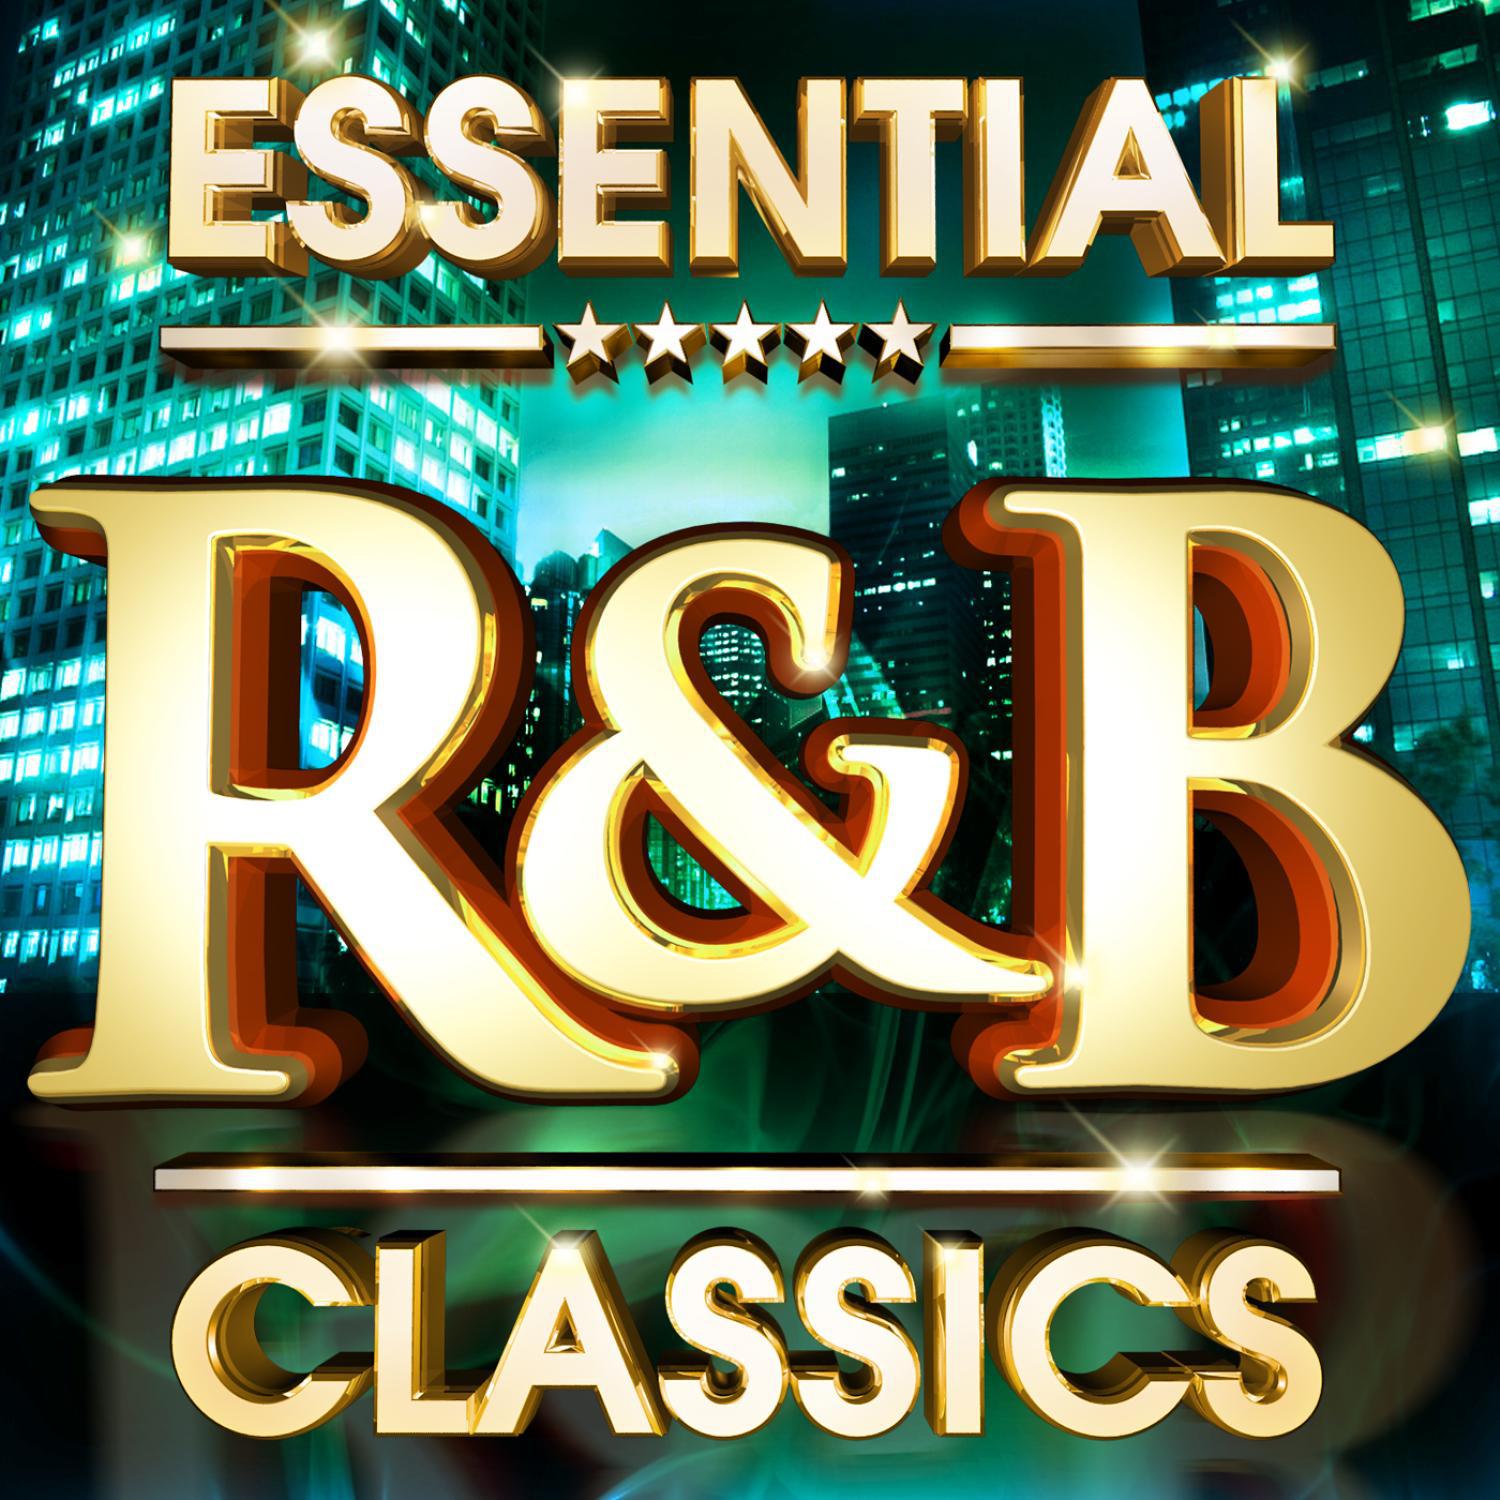 Essential R&B Classics - The Top 30 Best Ever RnB Hits Of All Time - R & B !